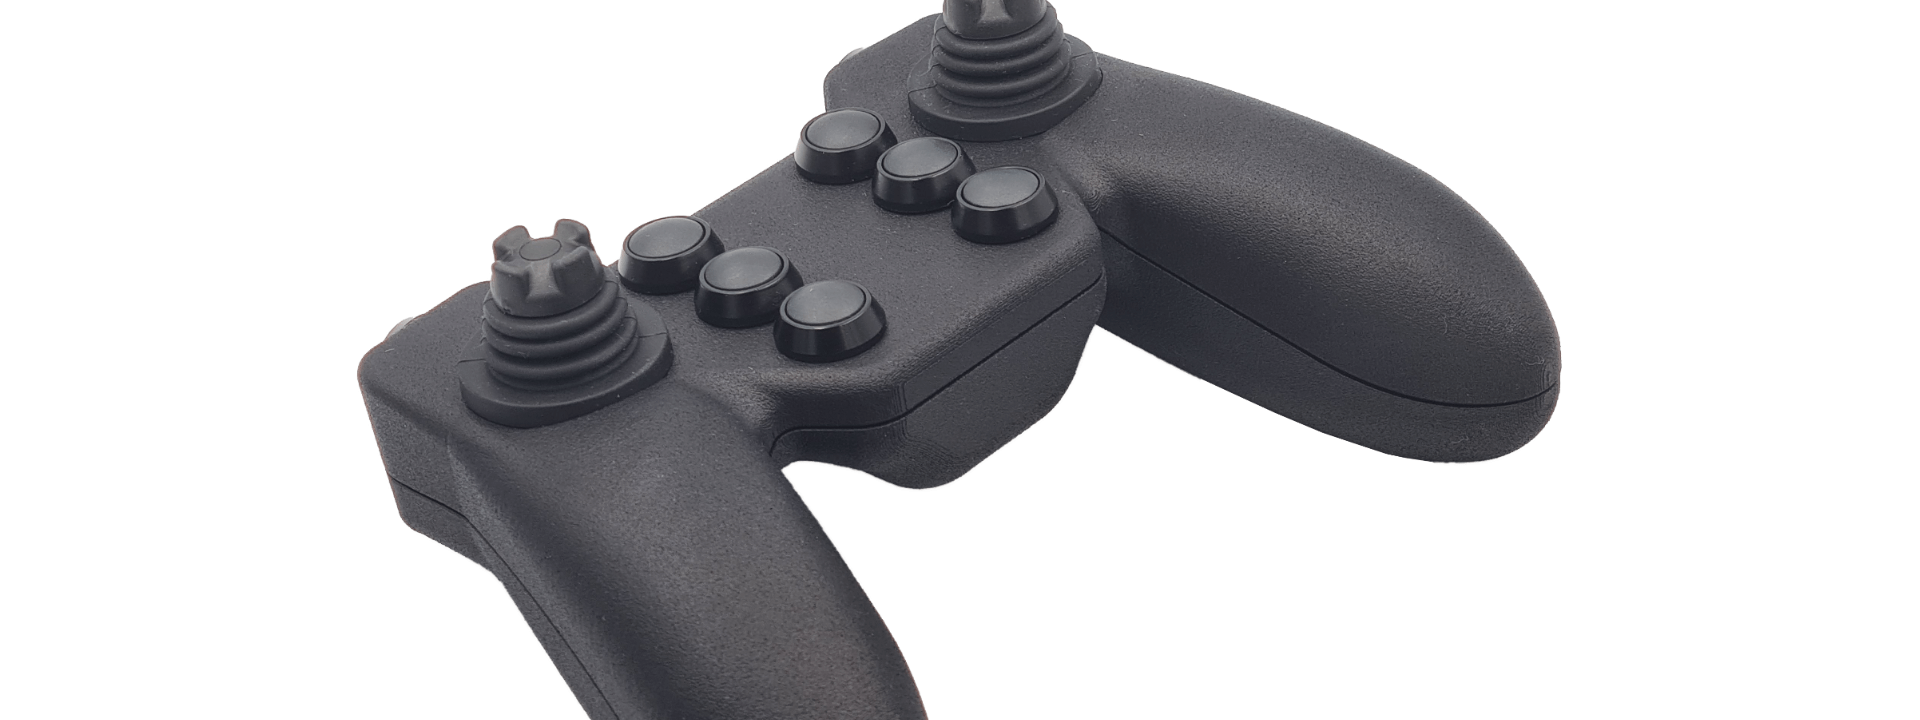 Rugged Controller